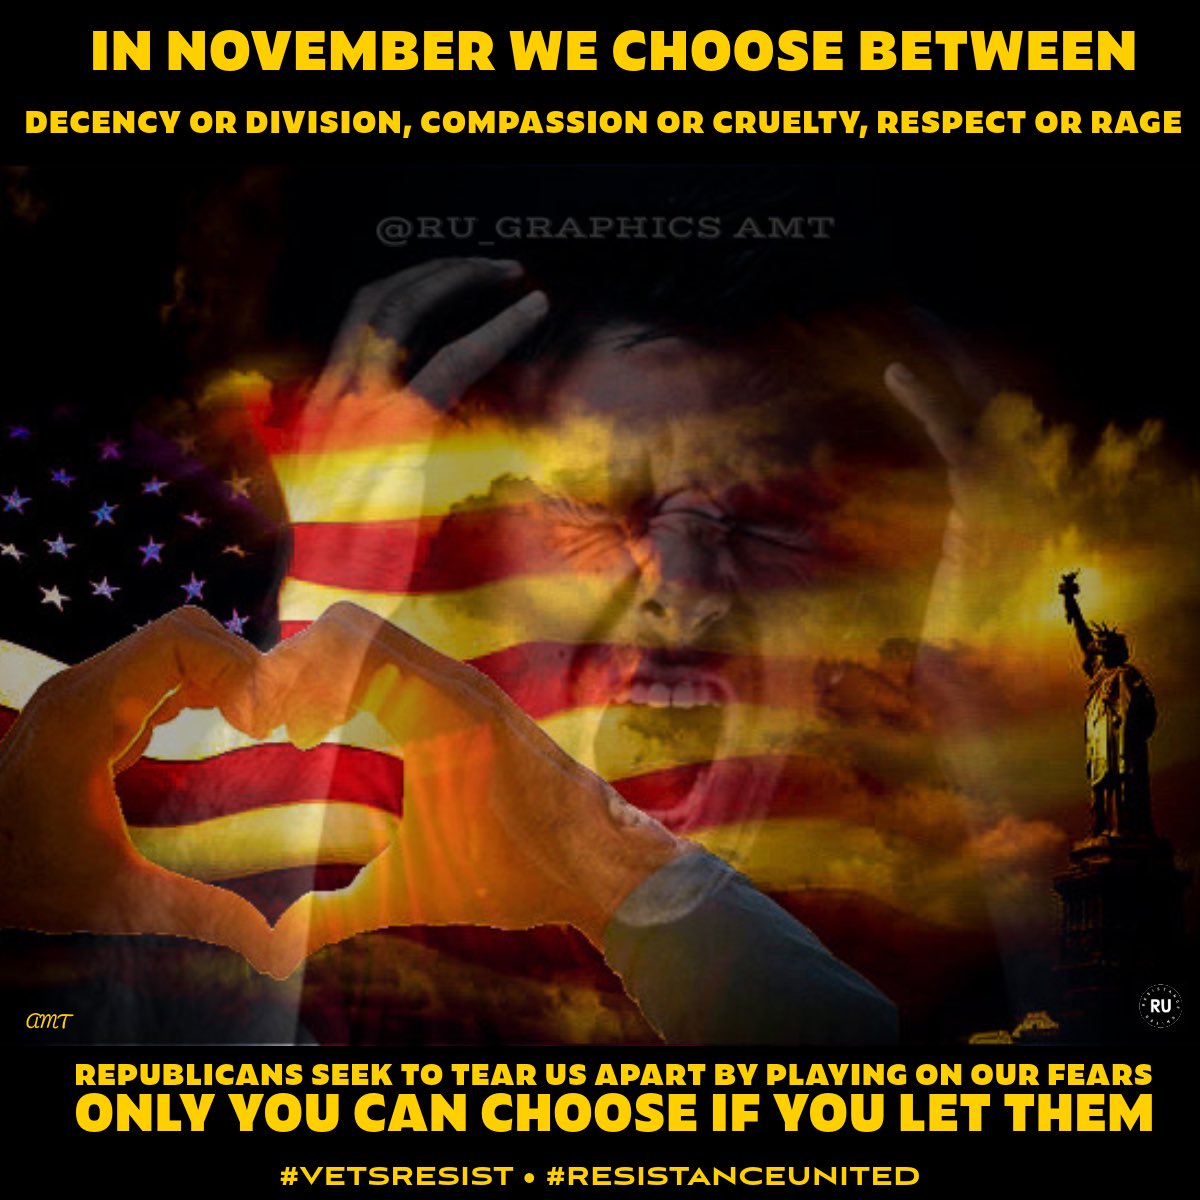 #ResistanceUnited Rep can’t win on policy & or helping🇺🇸ppl, all they have fear especially for white ppl Fear of immigrants Fear of non-Christians Fear of minorities taking your jobs Name 1 way fear,division, cruelty or rage helped you? Cntrl by fear or a better life You choose